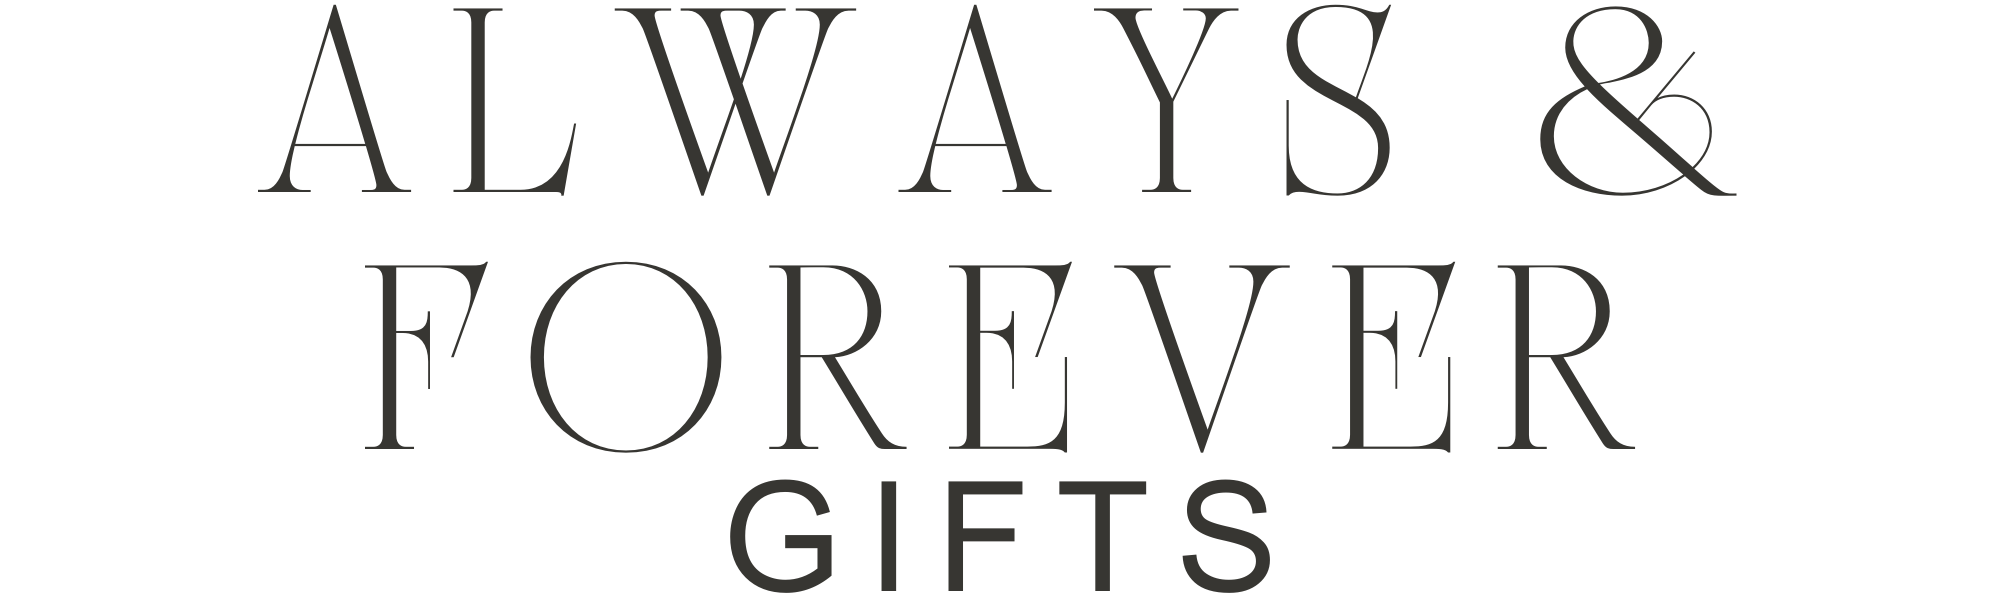 ALWAYS & FOREVER GIFTS